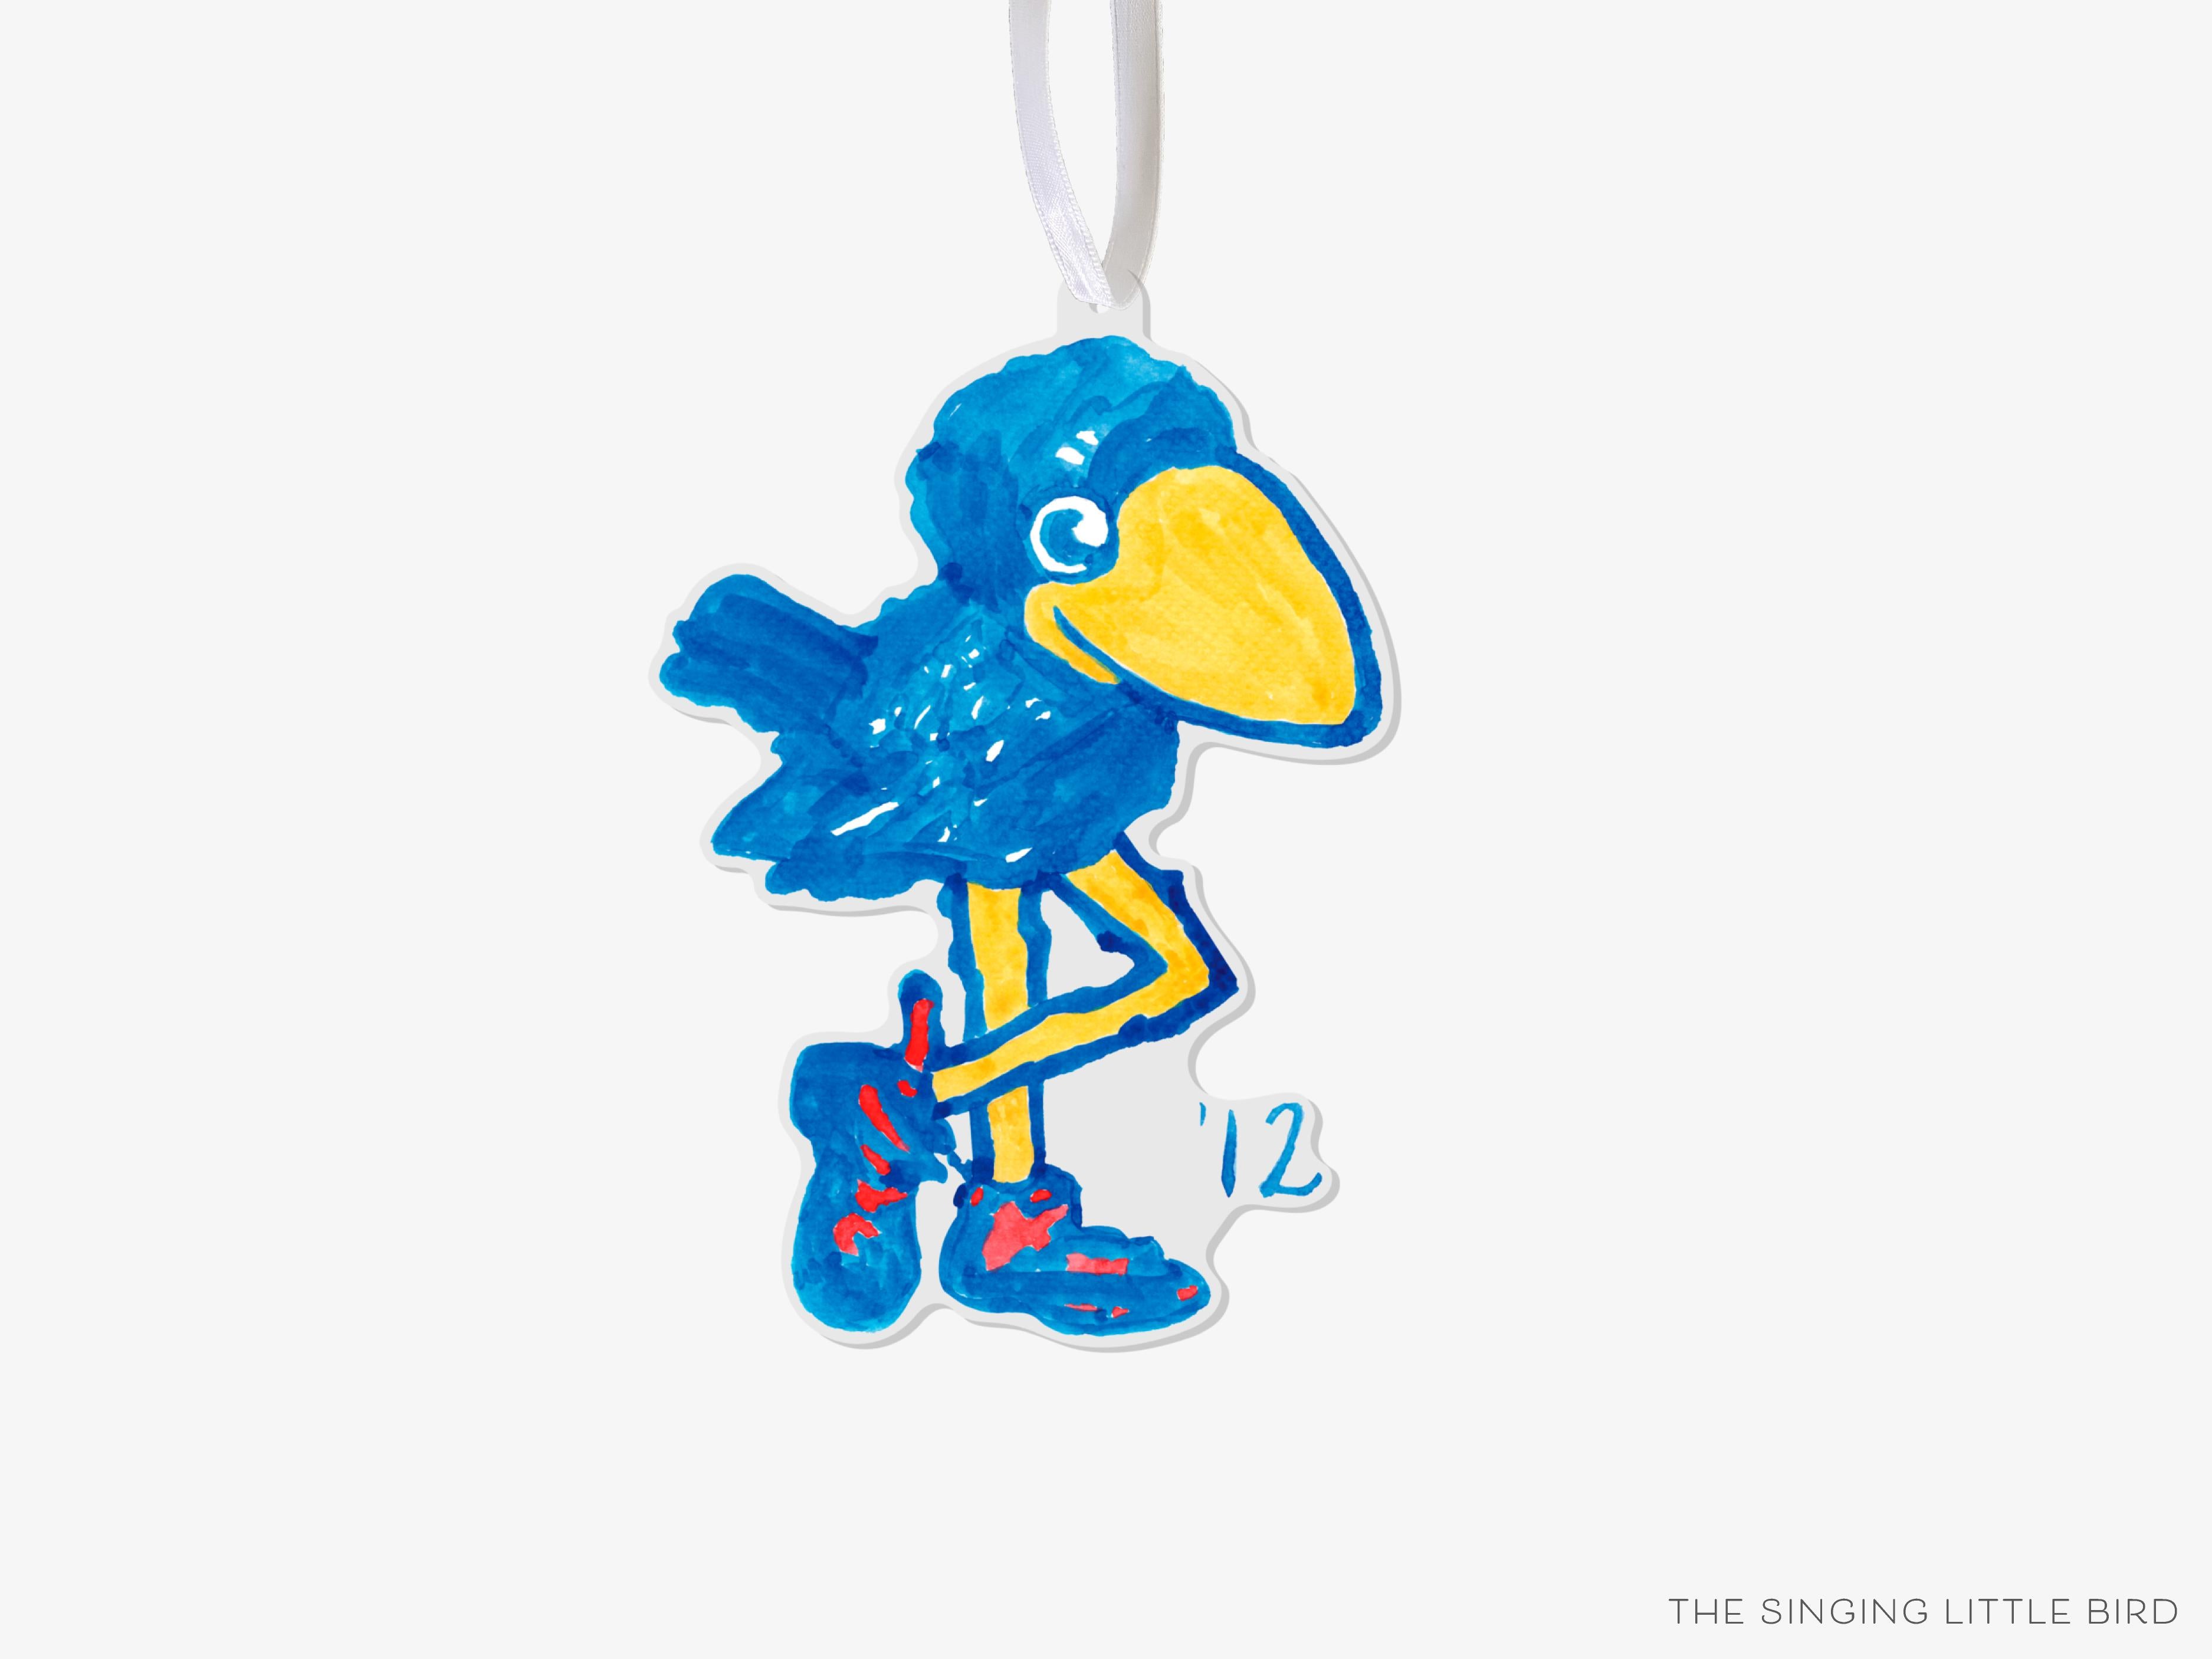 1912 Kansas Jayhawk Acrylic Ornament [Officially Licensed]-These acrylic ornaments feature our hand-painted watercolor 1912 Kansas Jayhawk. They include a white silk ribbon and measure approximately 4" on its longest side, making a great addition to your Christmas tree or gift for the University of Kansas lover in your life.-The Singing Little Bird